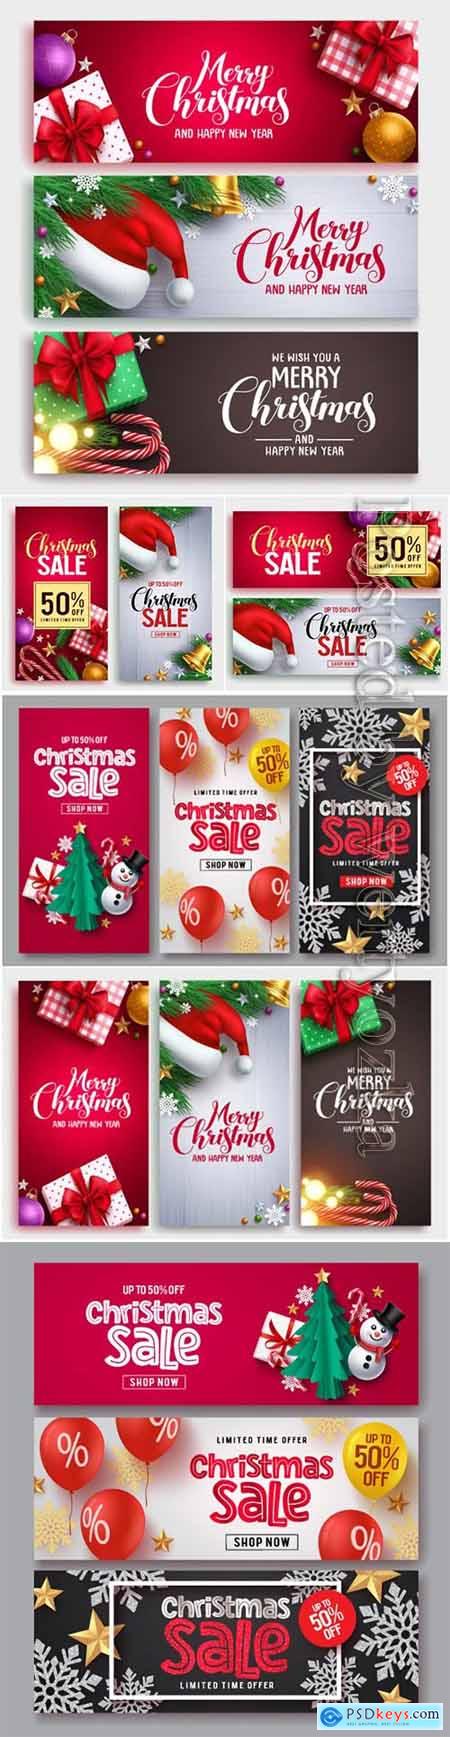 Christmas Sale Vector Banner Set Free Download Photoshop Vector Stock